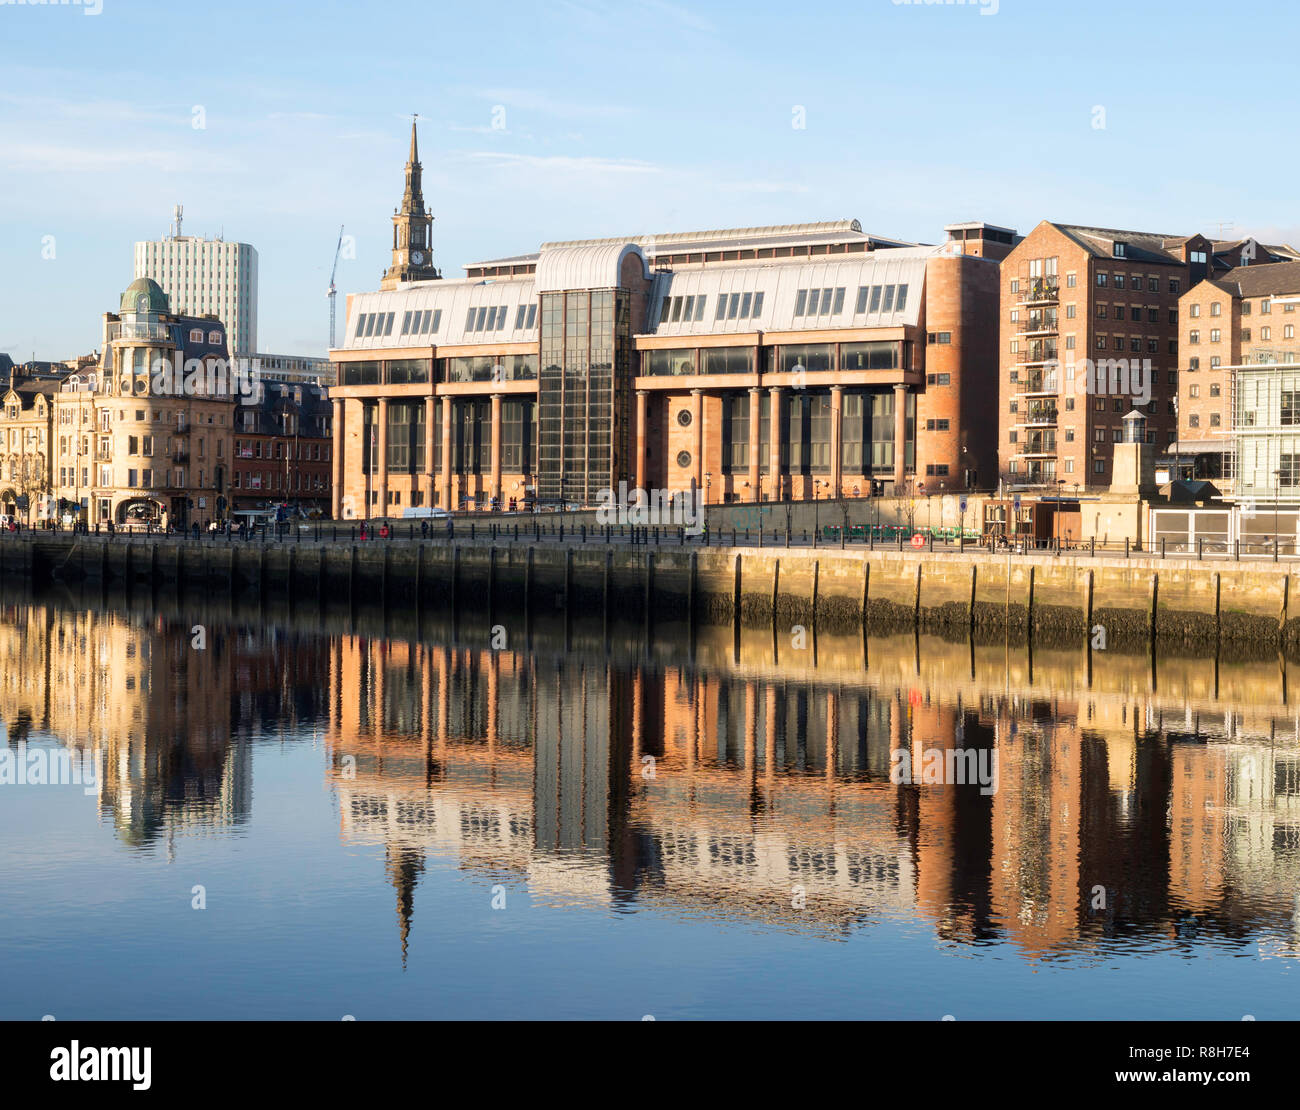 Newcastle crown court building reflected in the river Tyne, north east England, UK Stock Photo